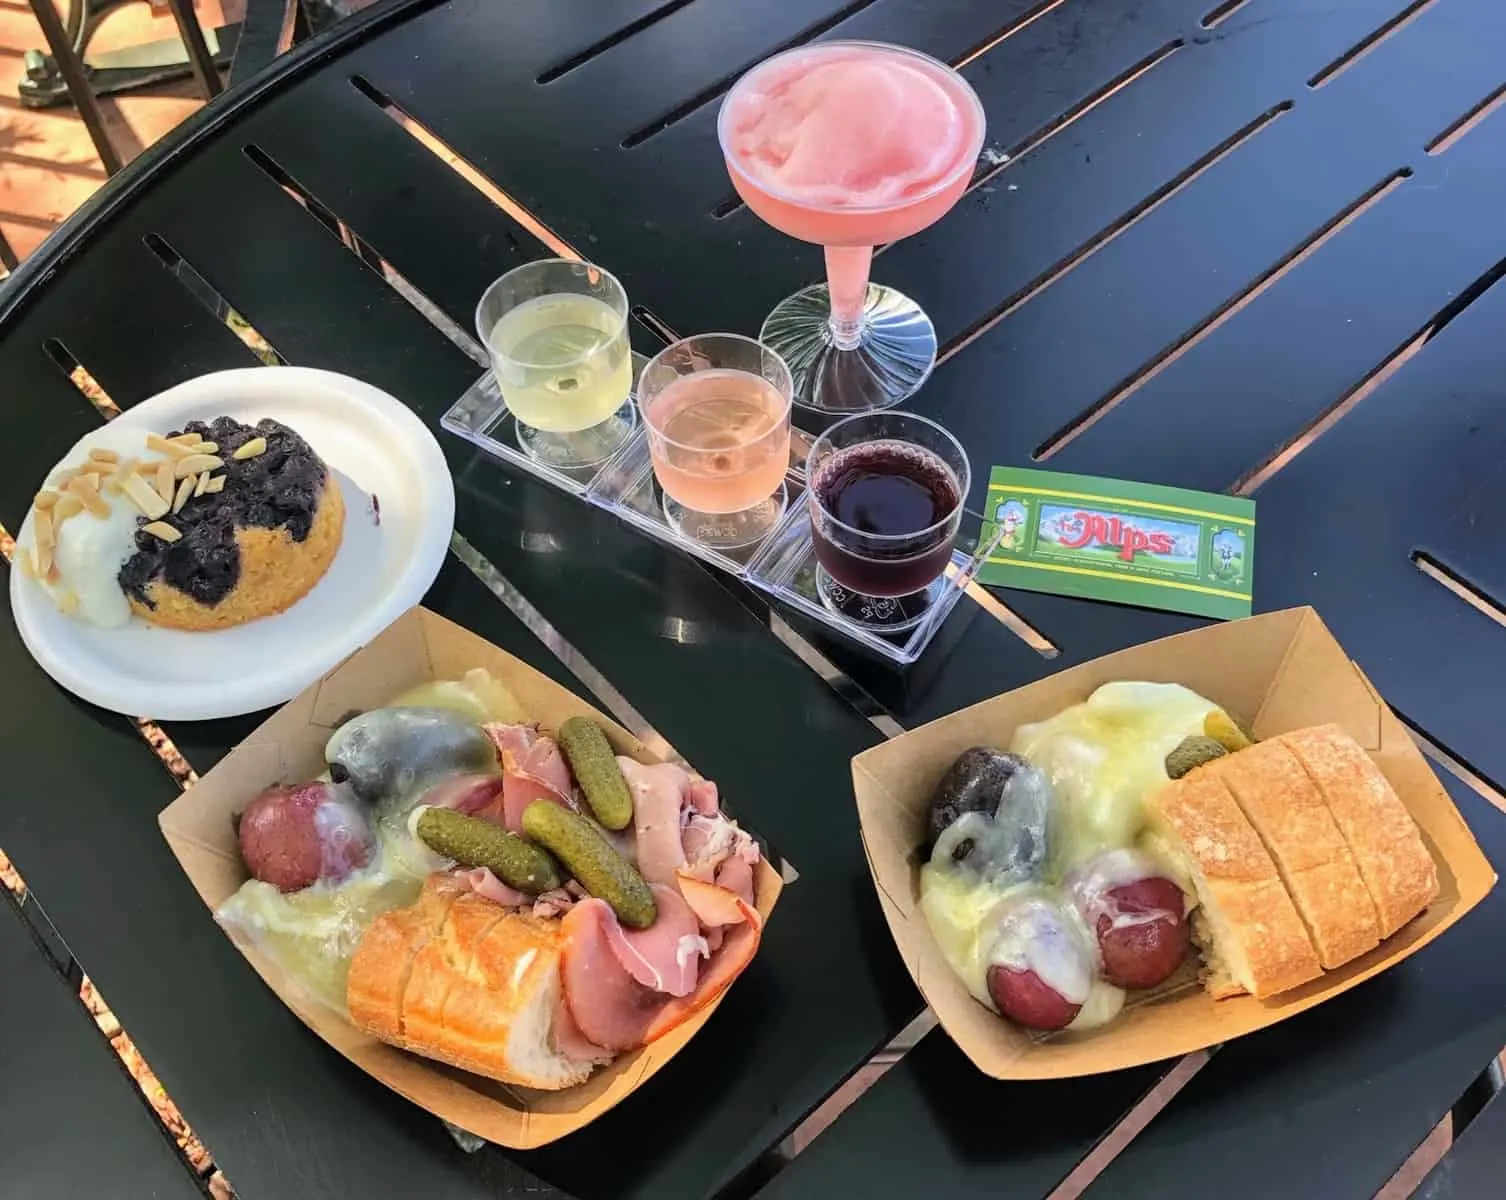 2023 Epcot Food and Wine Booths, Menus, and Reviews (with photos!)